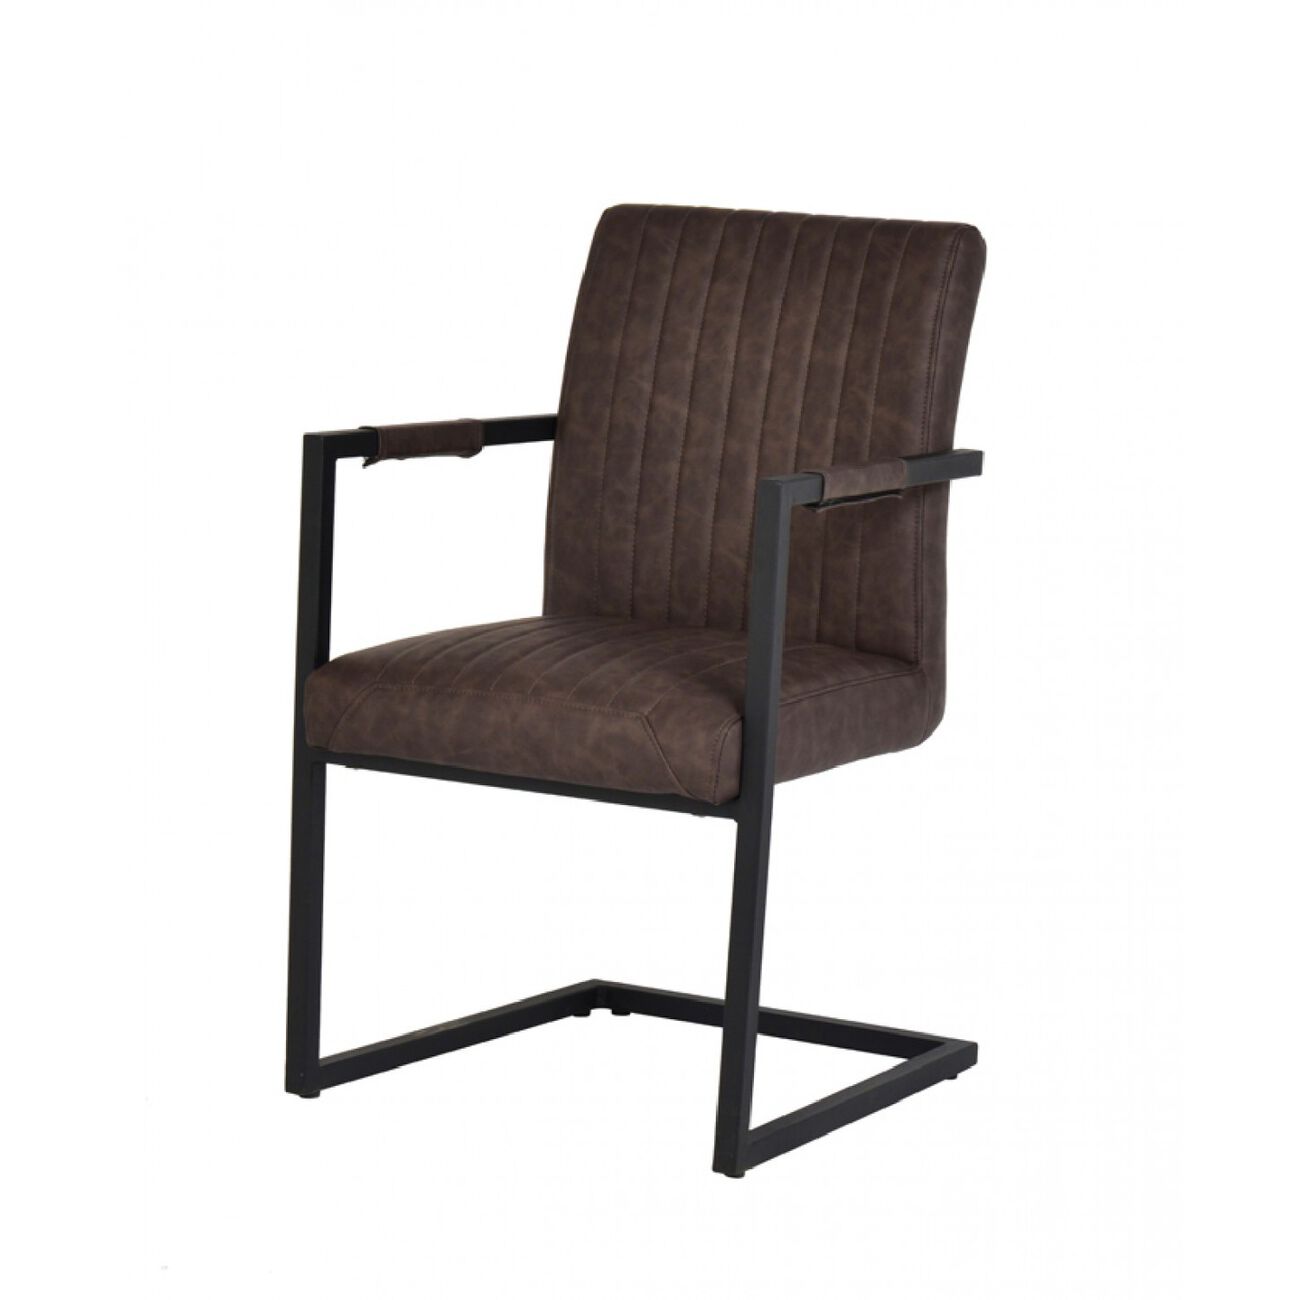 Metal Dining Chair with Cantilever Base and Vertical Stitch,Set of 2, Brown